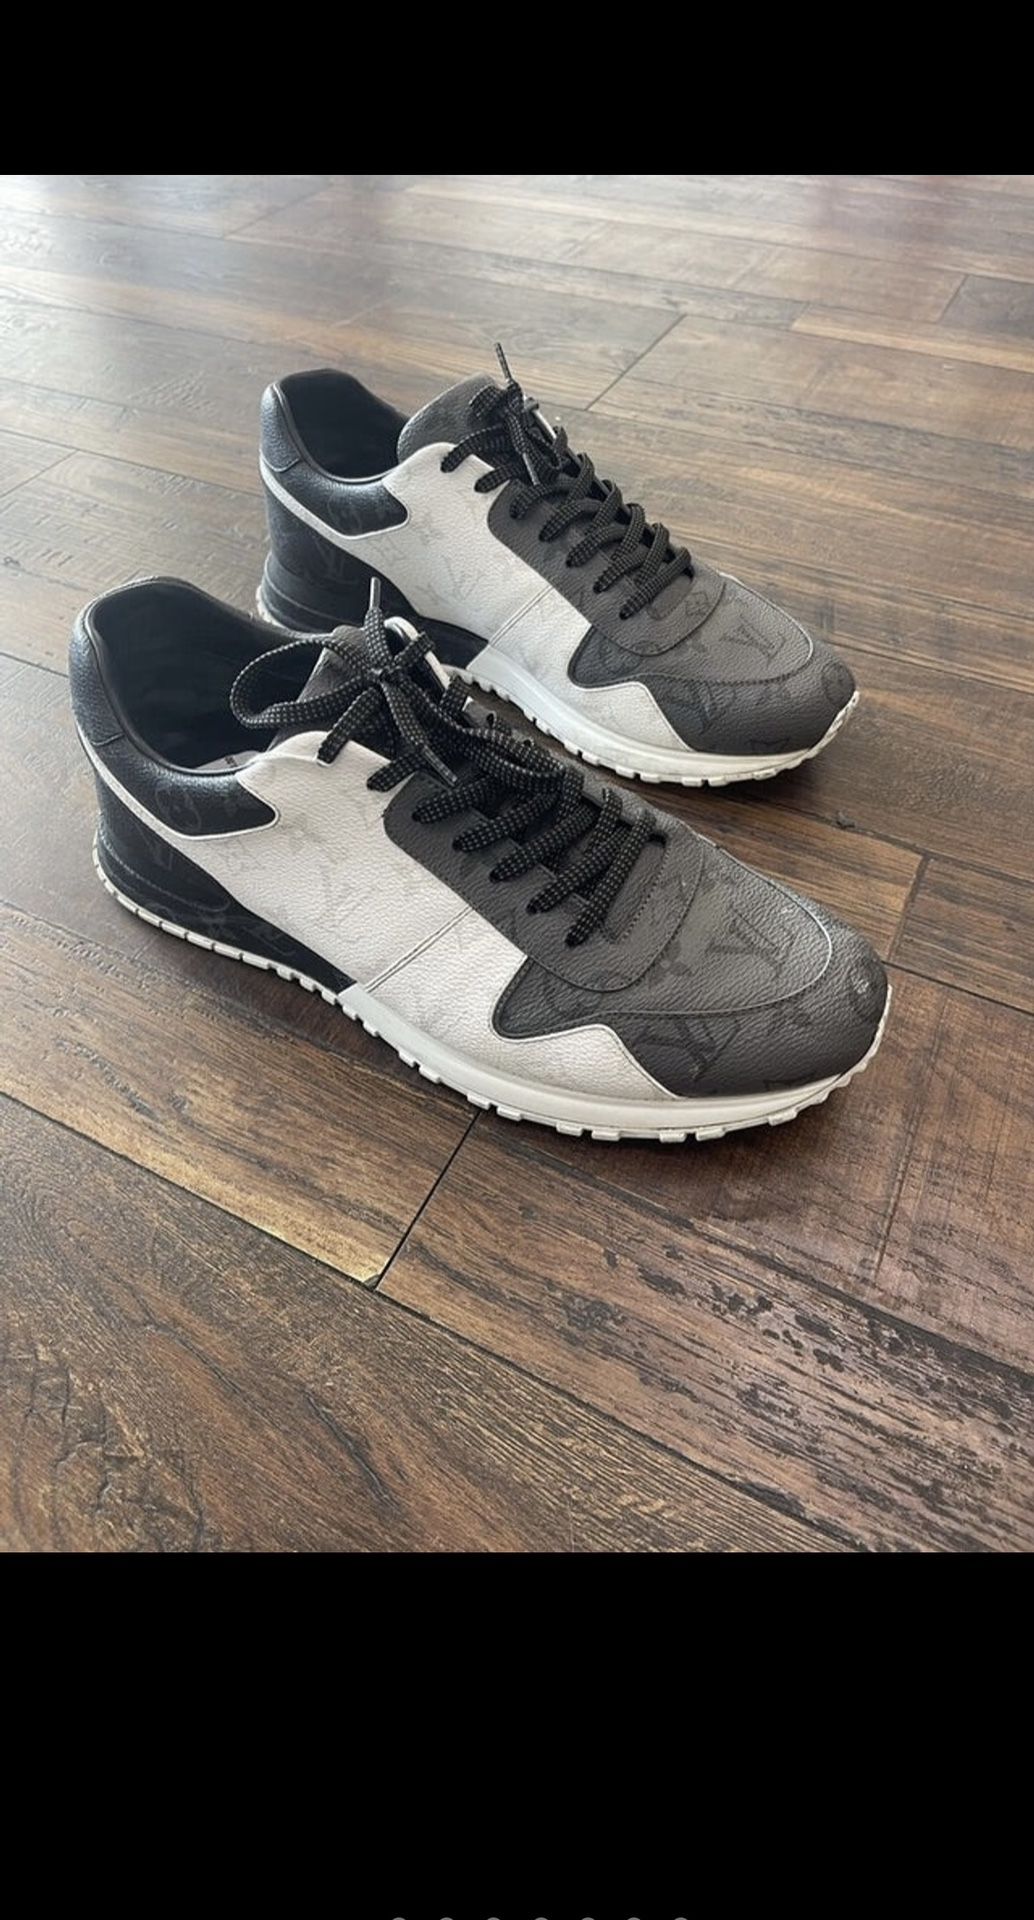 Louis Vuitton Sneakers Brand New for Sale in Troy, MI - OfferUp